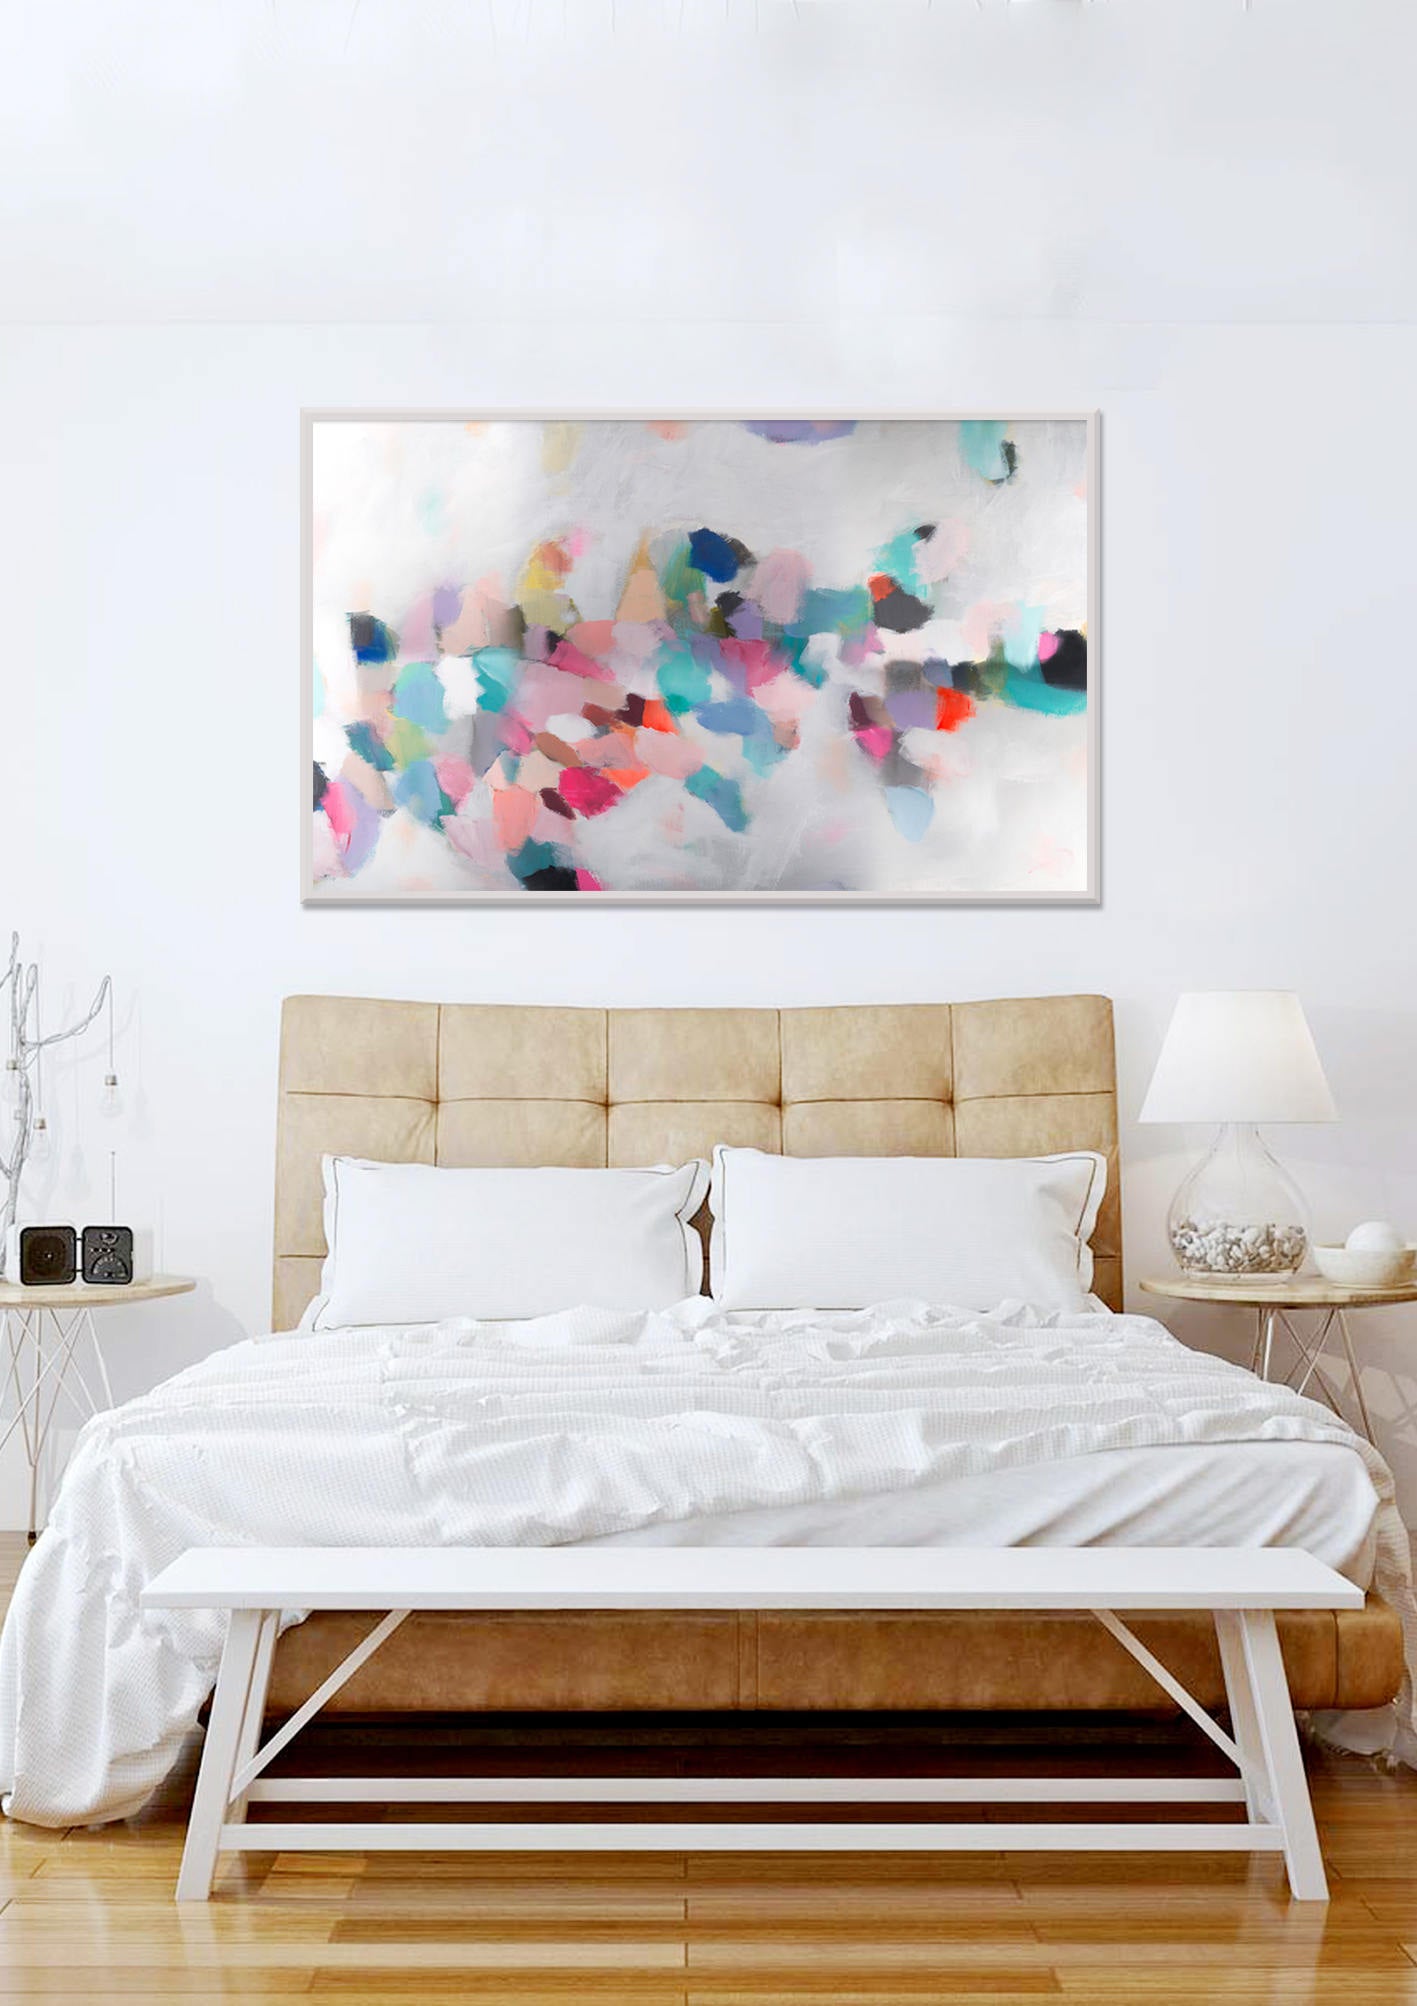 Large modern wall art giclee print, large abstract painting print, colorful painting, acrylic abstract painting by Camilo Mattis - camilomattis.com